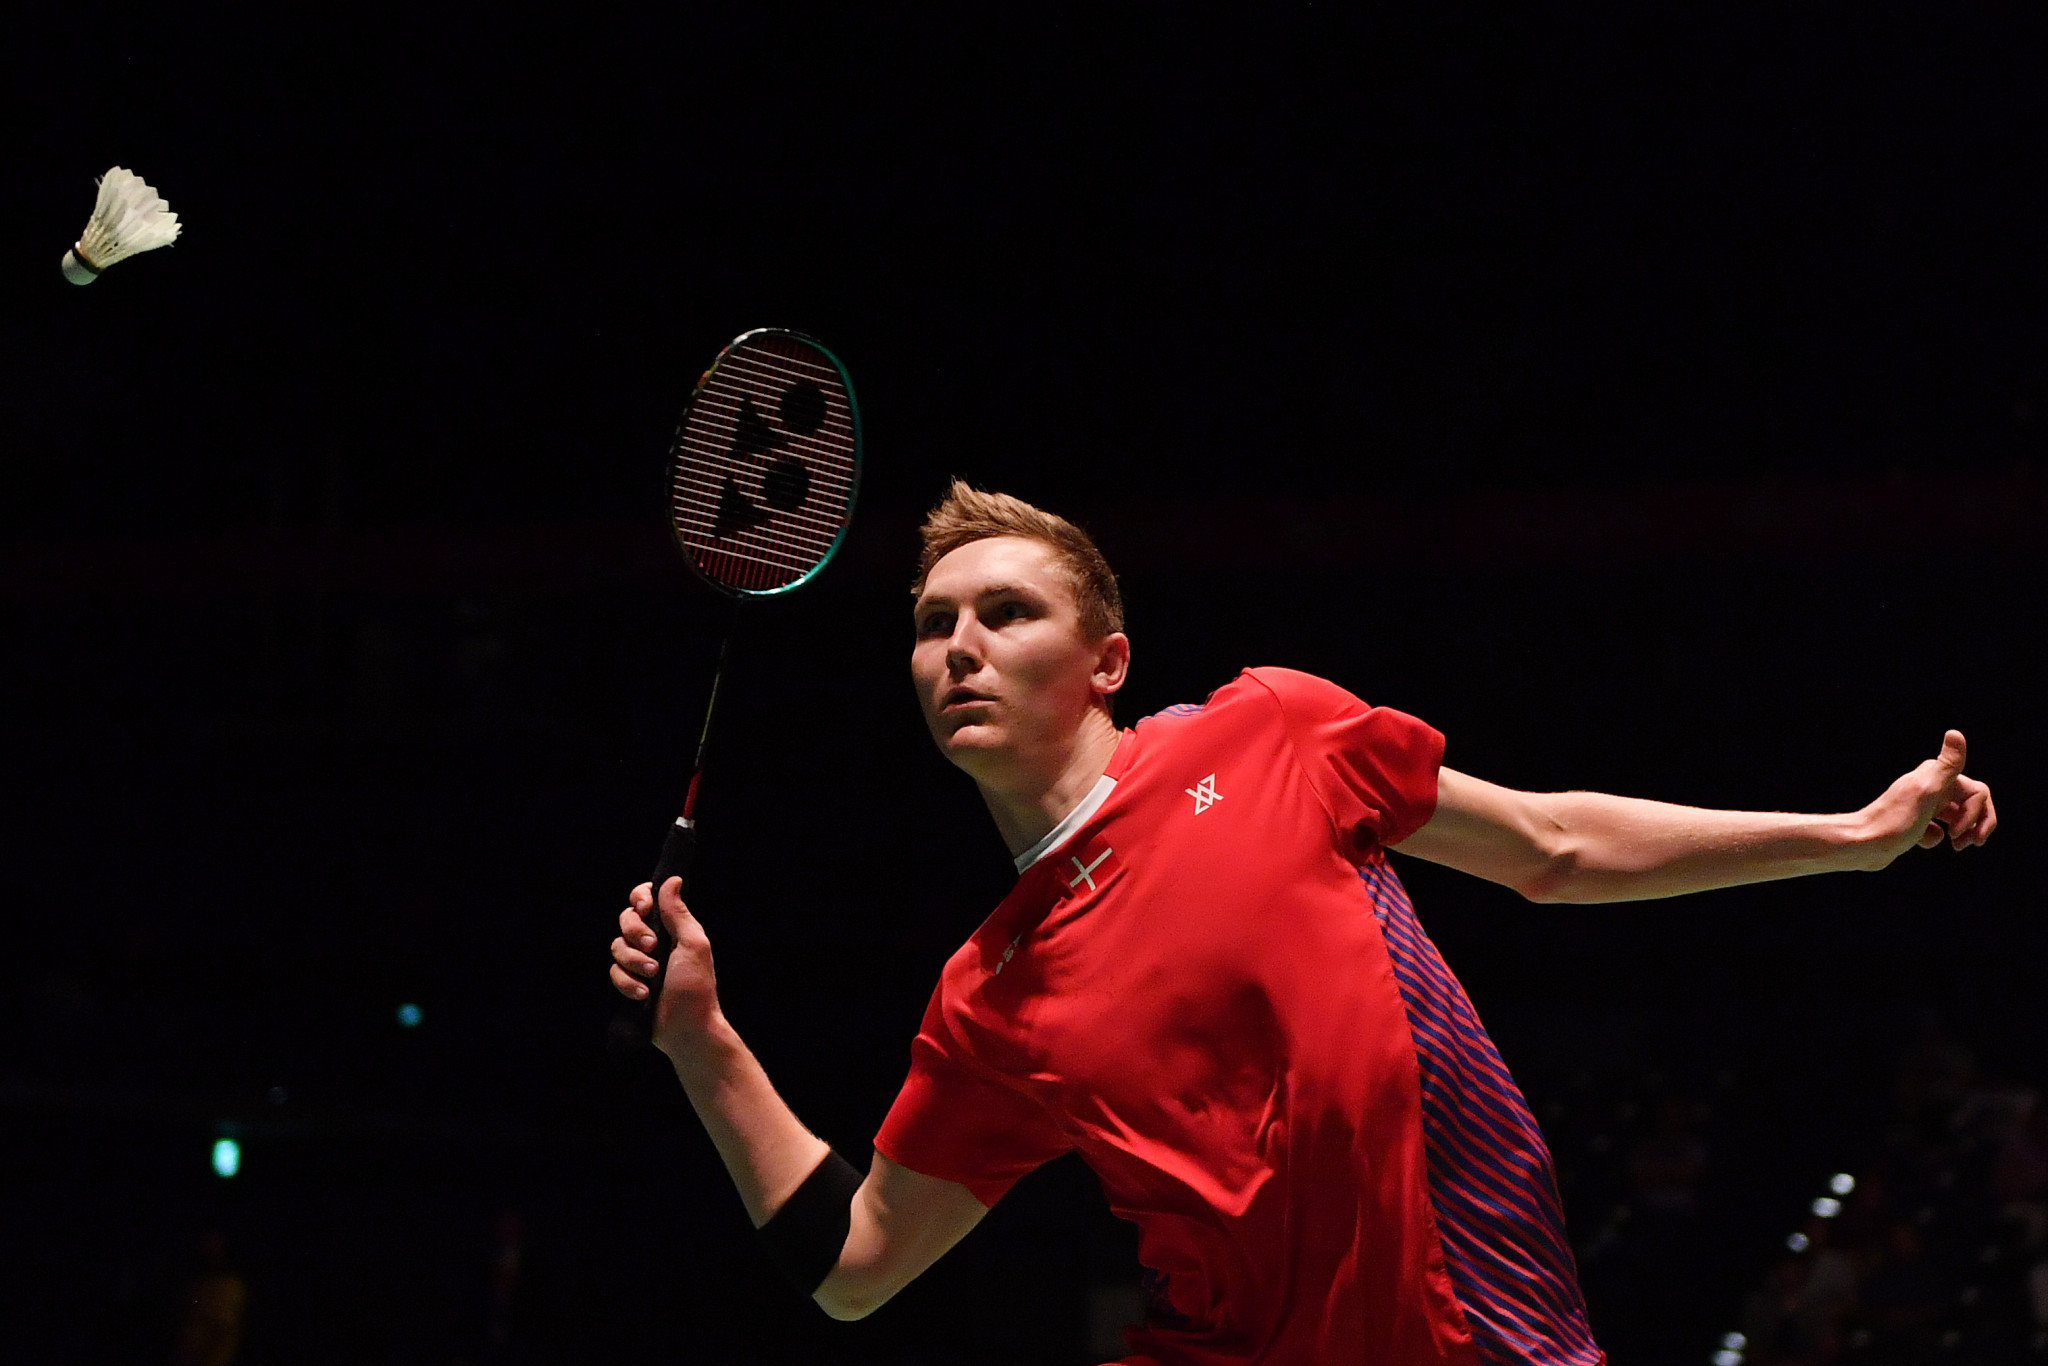 Top seed Axelsen suffers shock defeat to fellow home hope at BWF Denmark Open